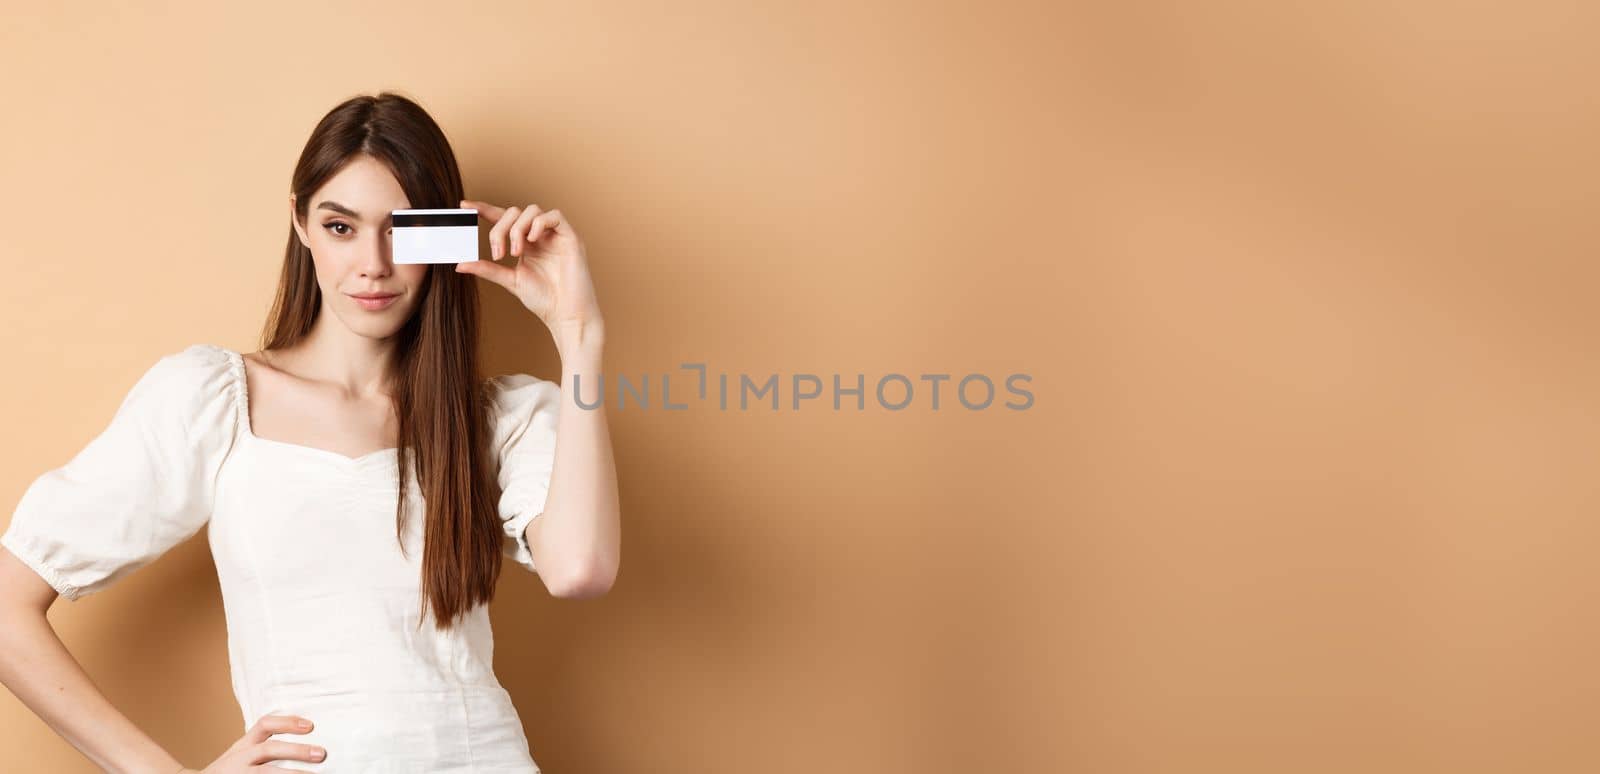 Sassy young woman showing plastic credit card on face and looking determined, going on shopping, standing against beige background.